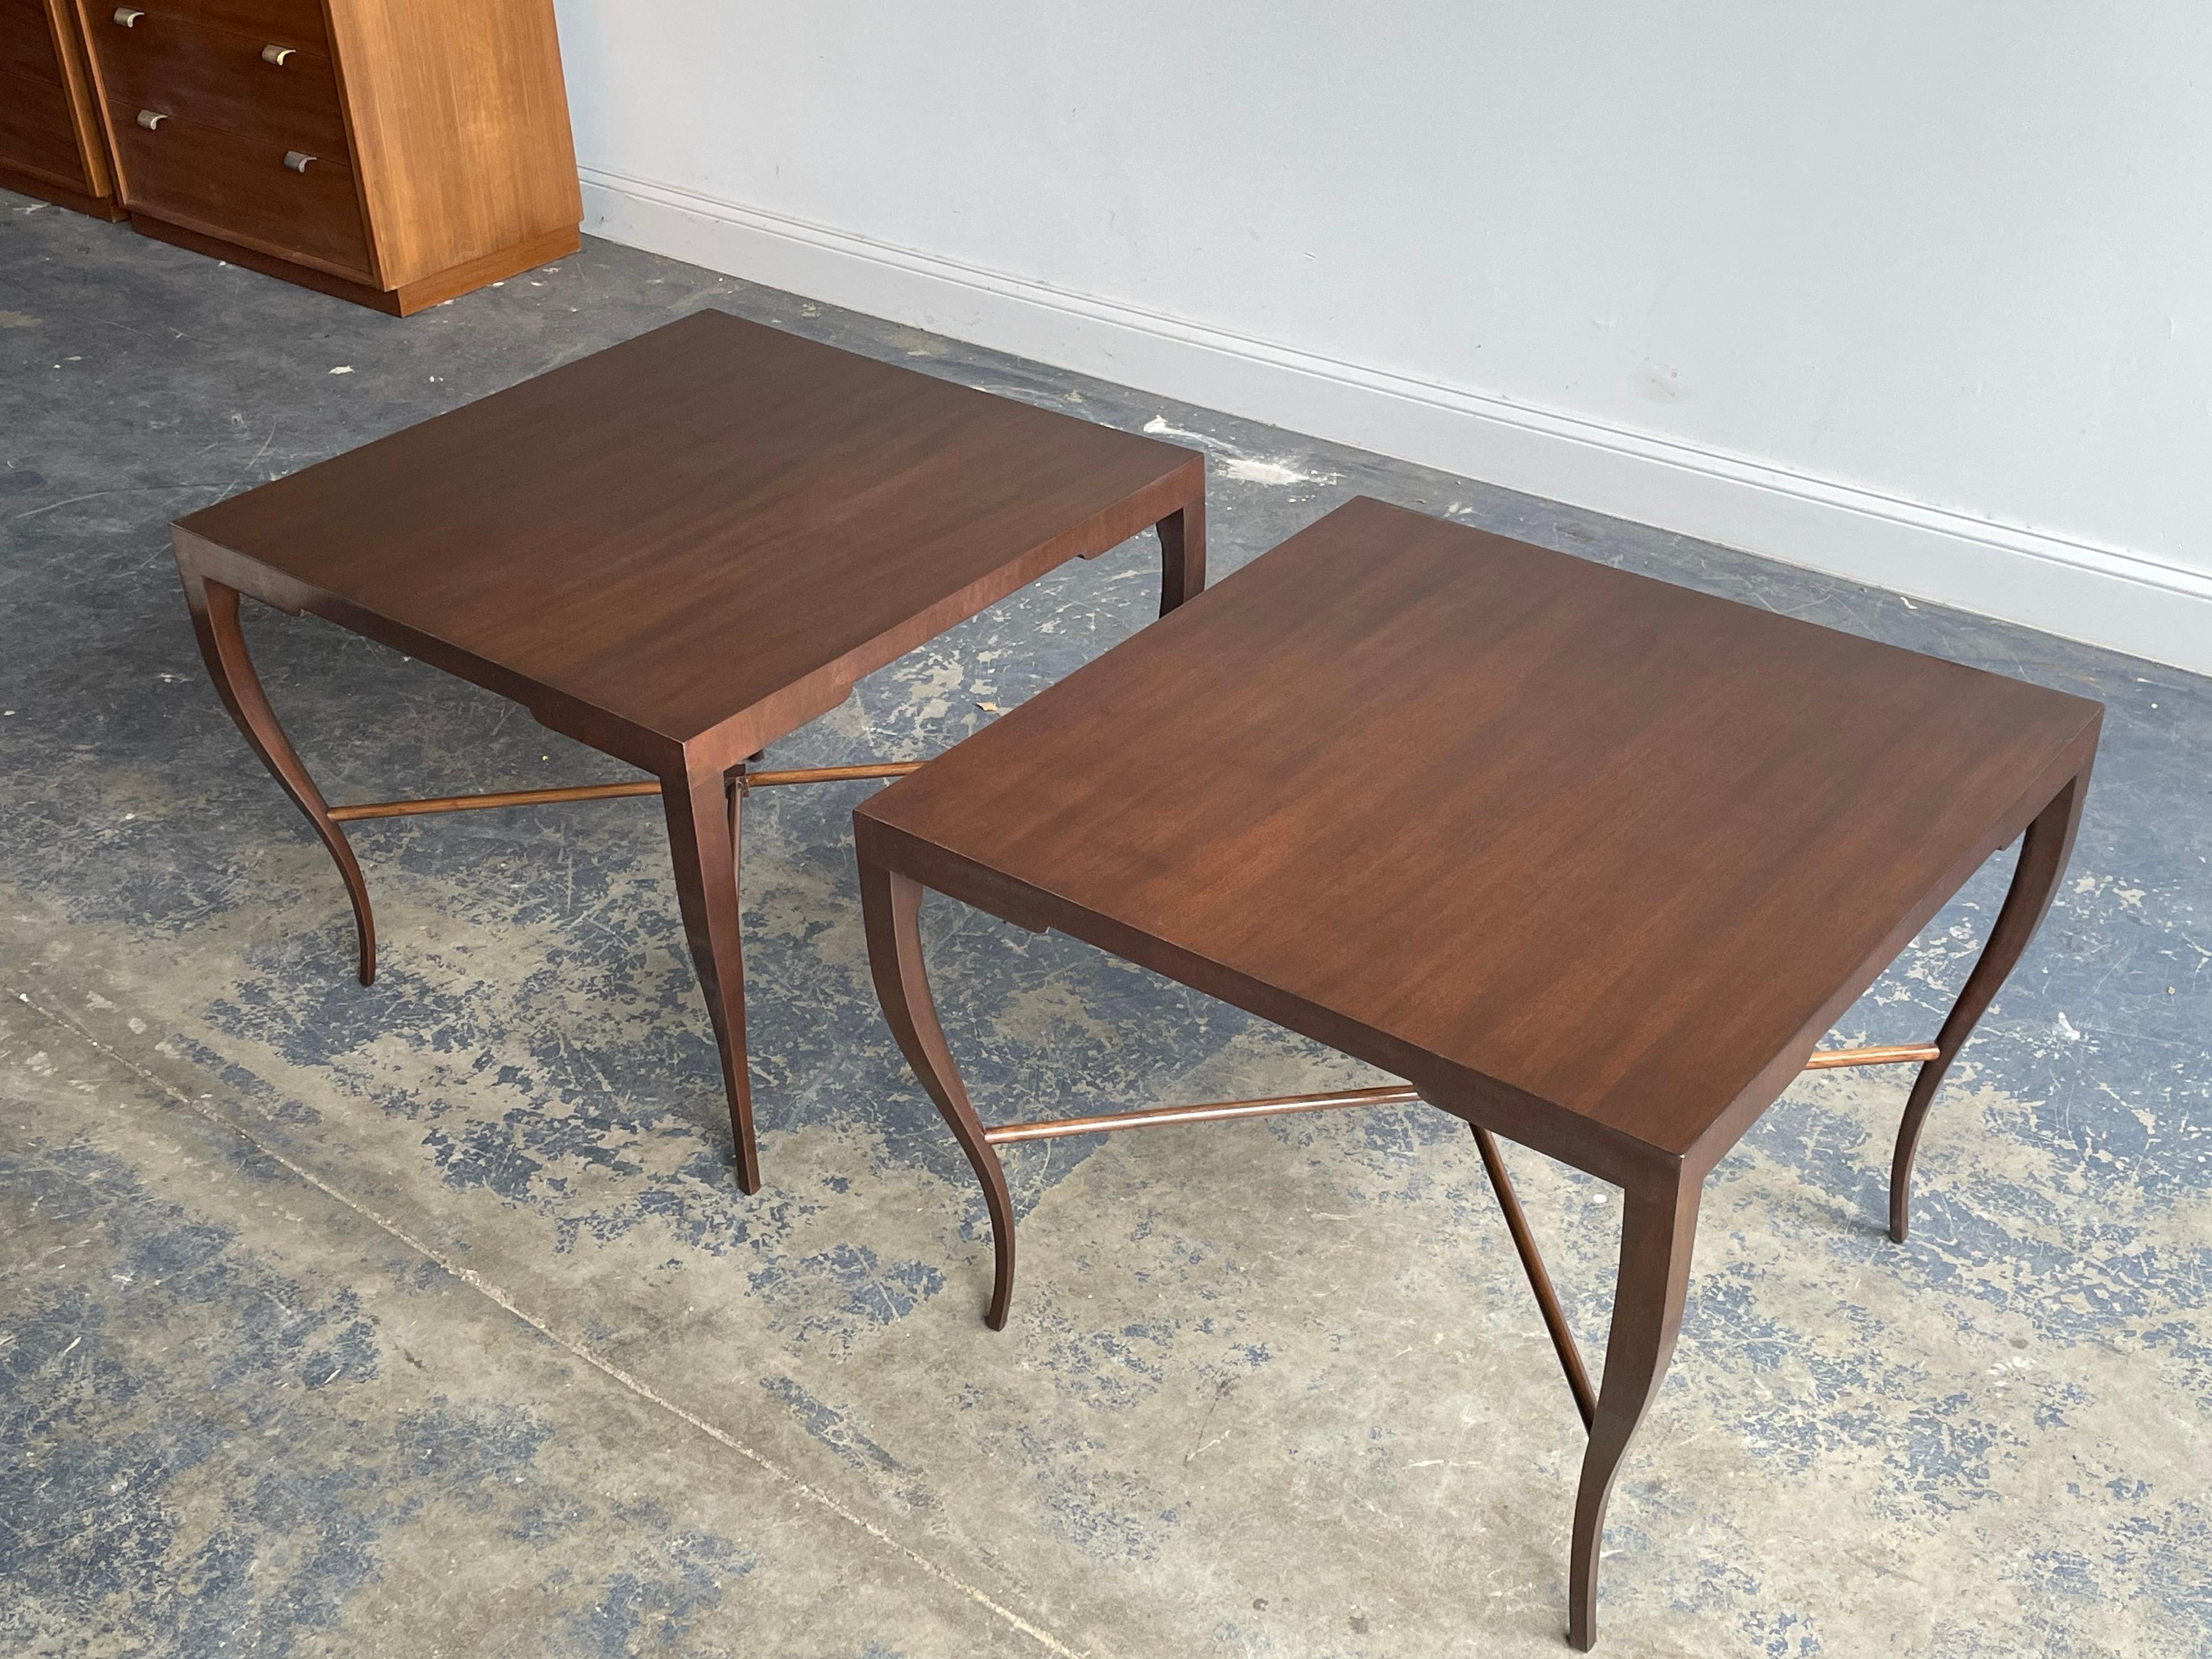 Rare pair of large scale end tables designed by Tommi Parzinger. Tables feature elegant curved legs and a beautiful top. Model #209. Great styling cues reminiscent of T.H. Robsjohn-Gibbings, Edward Wormley, Karl Springer, Harvey Probber, etc.